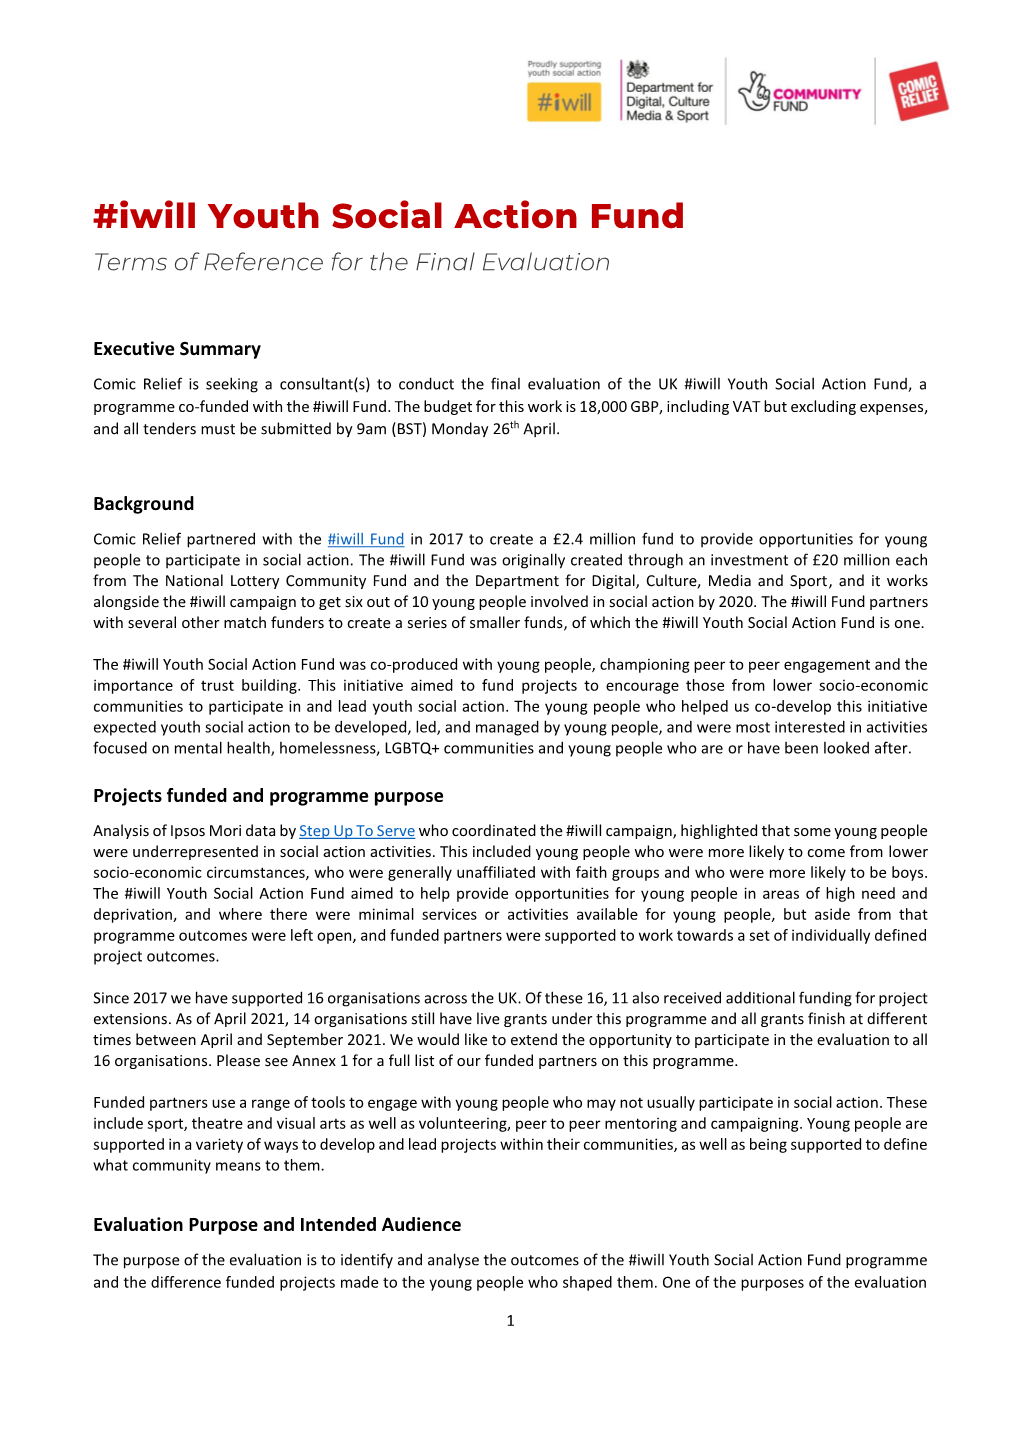 Iwill Youth Social Action Fund Terms of Reference for the Final Evaluation